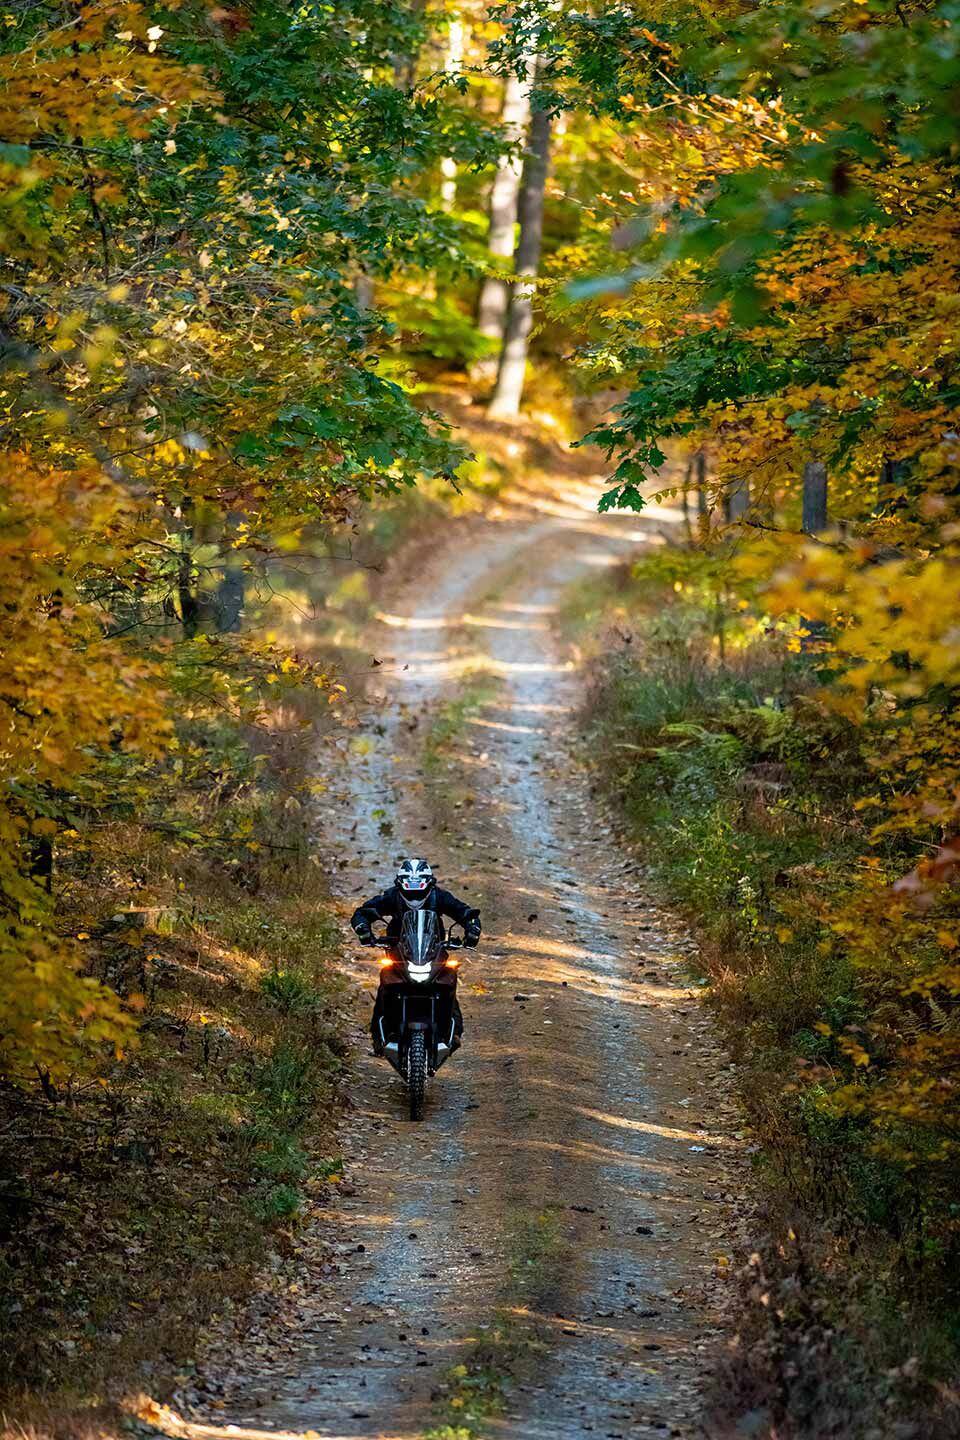 Our ride on the PA Wilds BDR-X offered amazing views in late October.